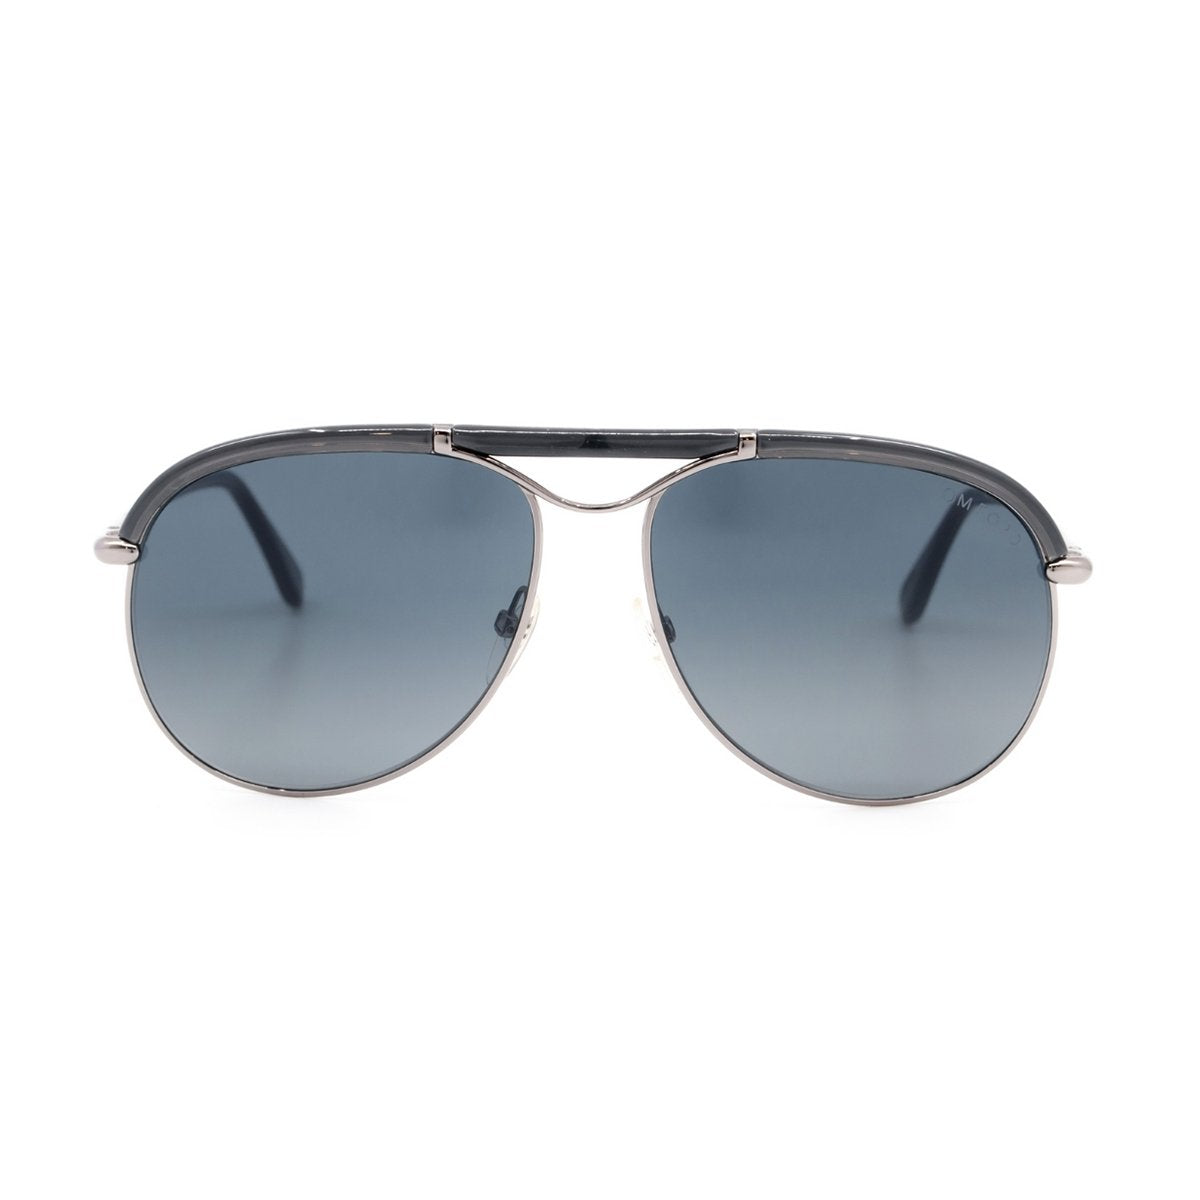 TOM FORD TF235 MARCO 12A Sunglasses